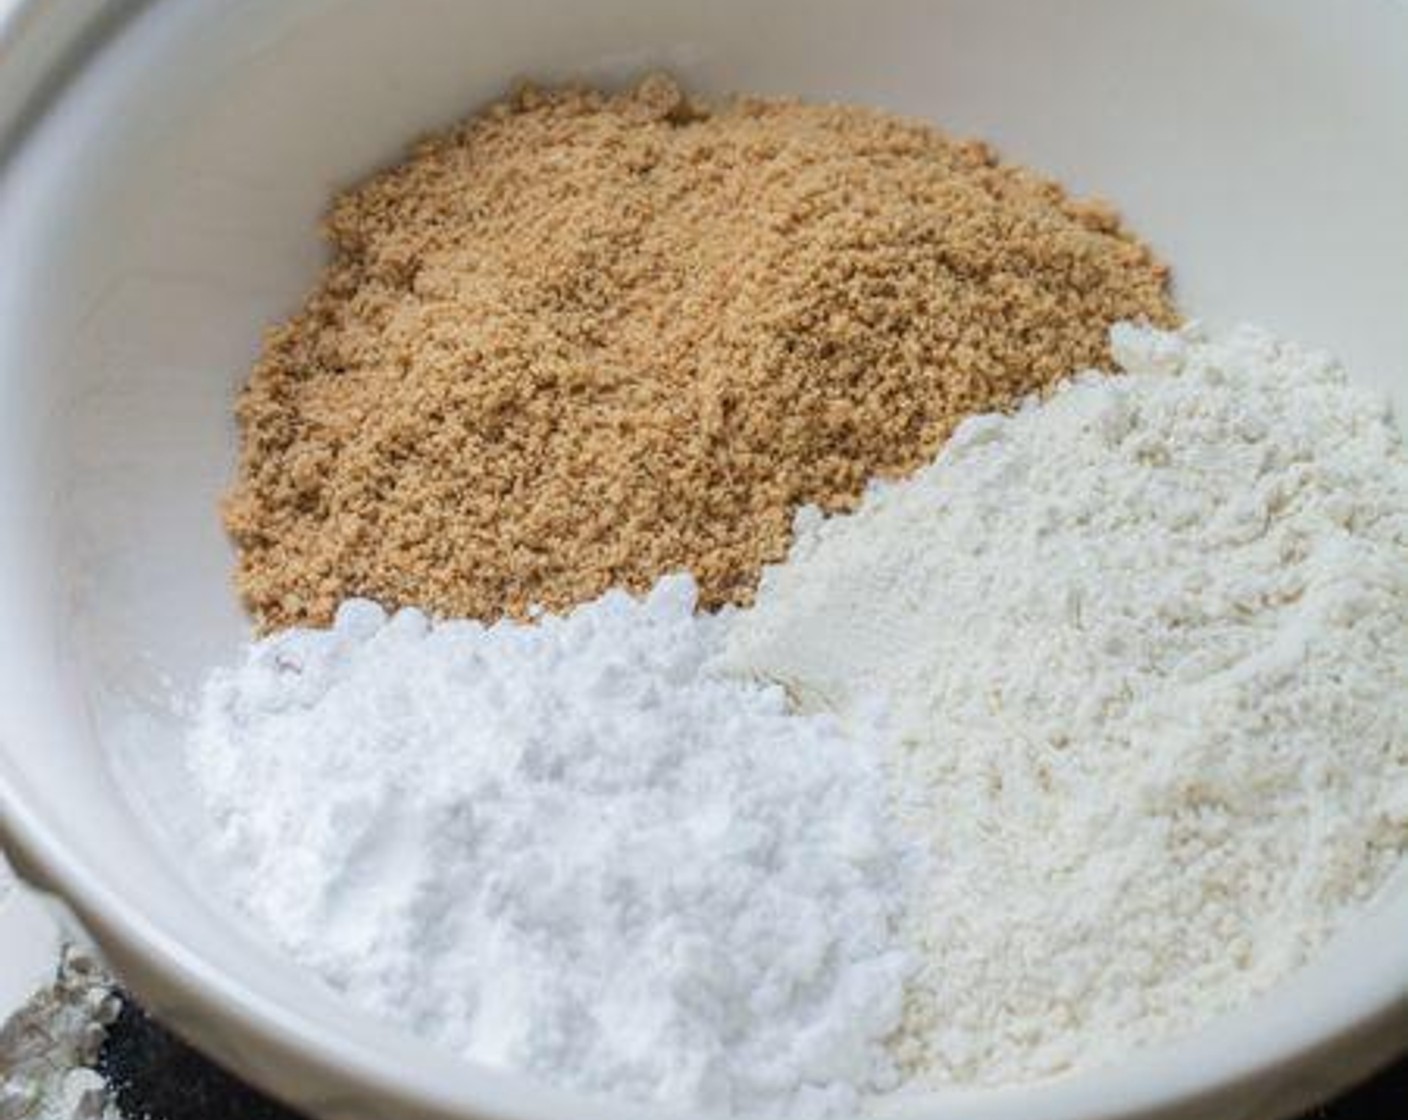 step 3 In a large mixing bowl, combine the ground peanuts, All-Purpose Flour (1 1/2 cups), Powdered Confectioners Sugar (1/2 cup), Granulated Sugar (1/2 cup) and Salt (1 pinch). Mix well.